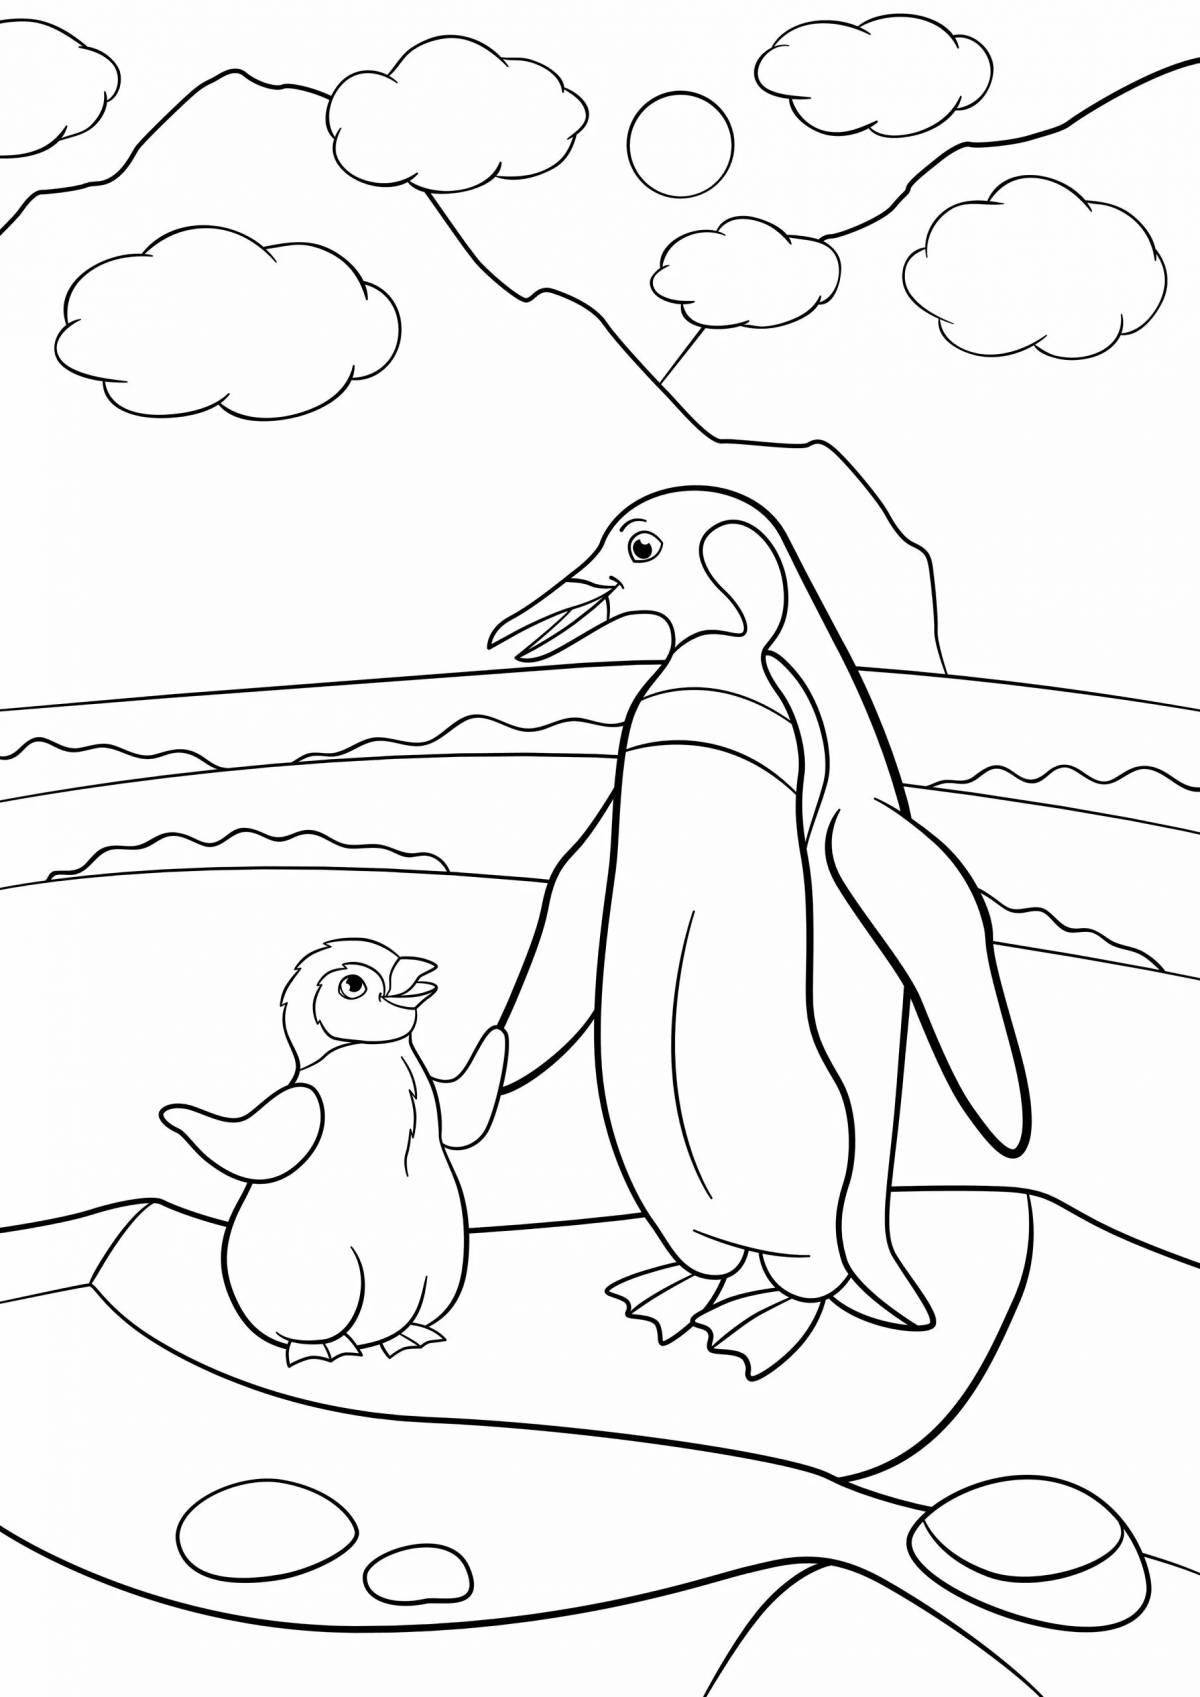 Cute antarctica animals coloring pages for kids